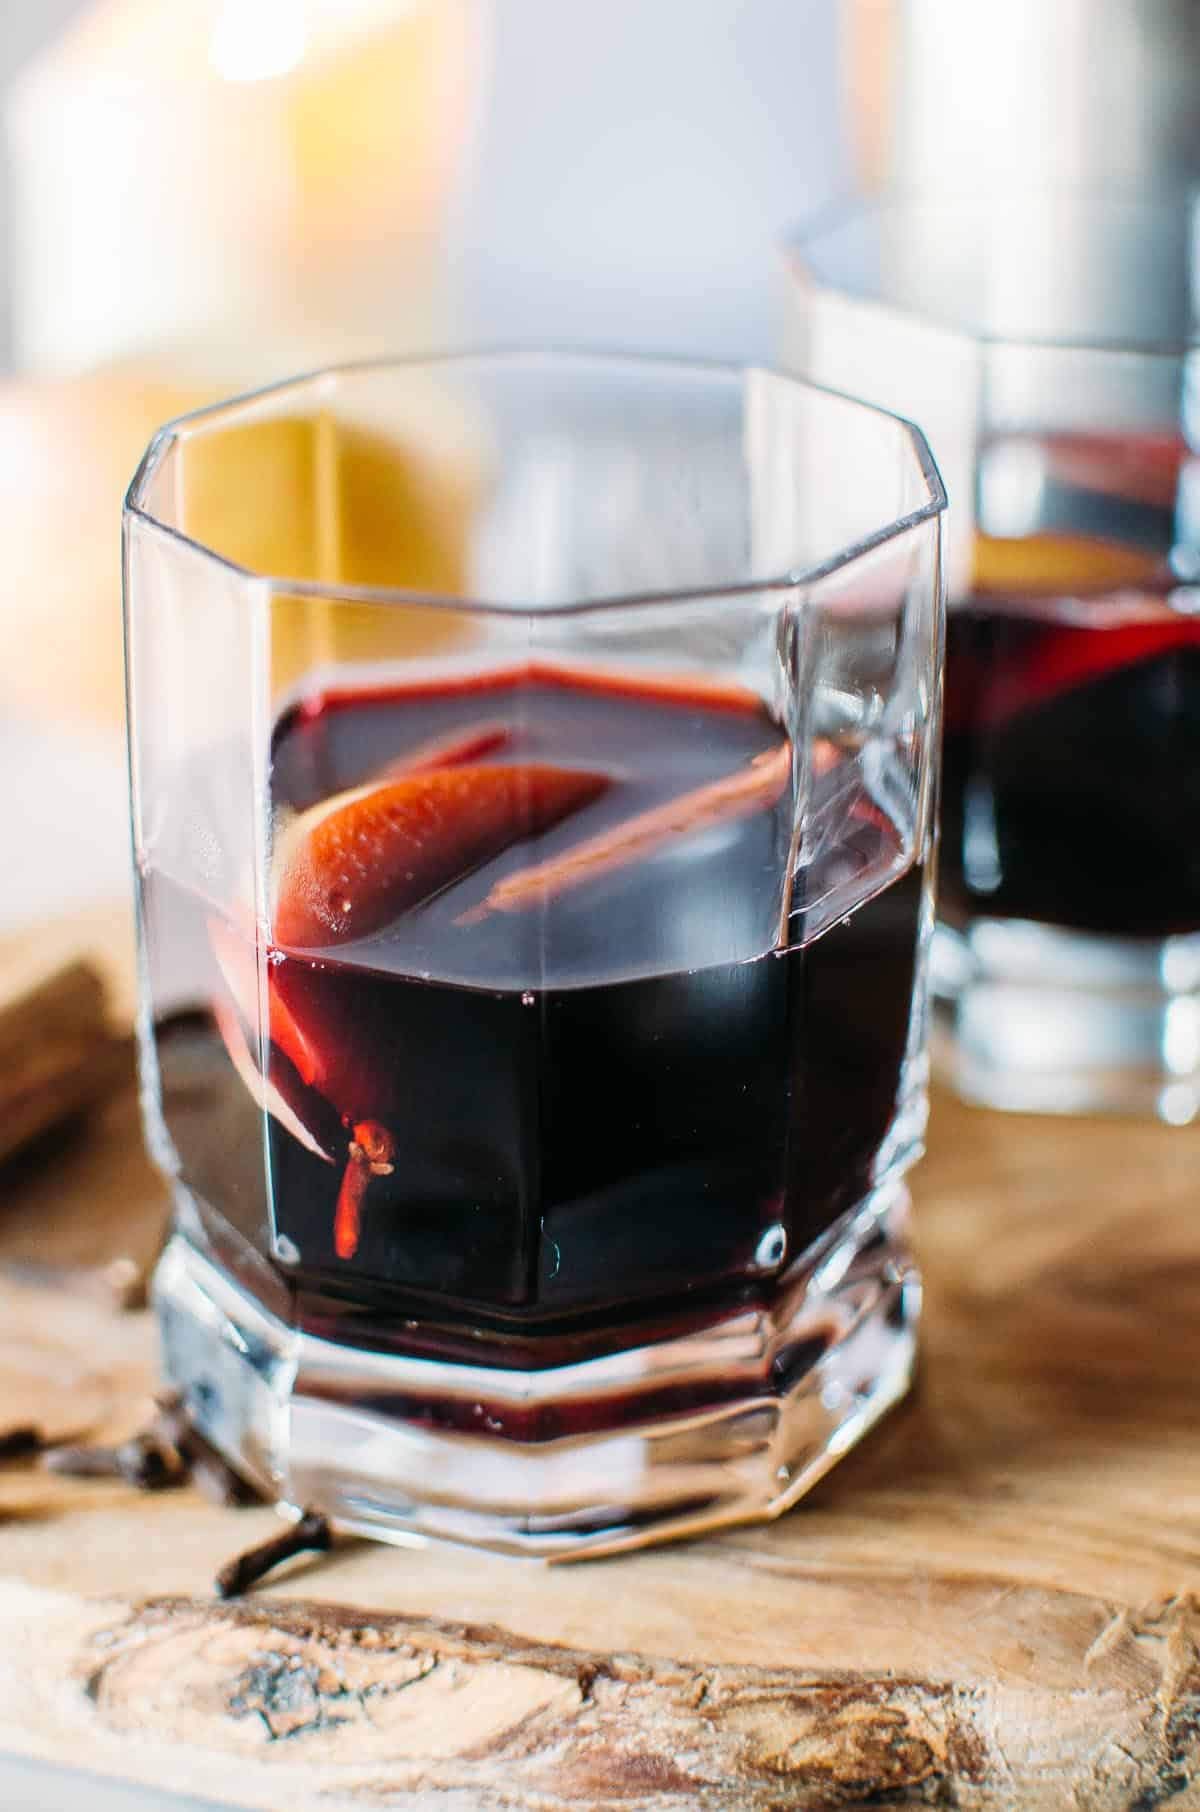 This soul-soothing Vin Brule' (Italian mulled wine) is simply made with wine, sugar, cinnamon, apples, and cloves. | Very EATalian